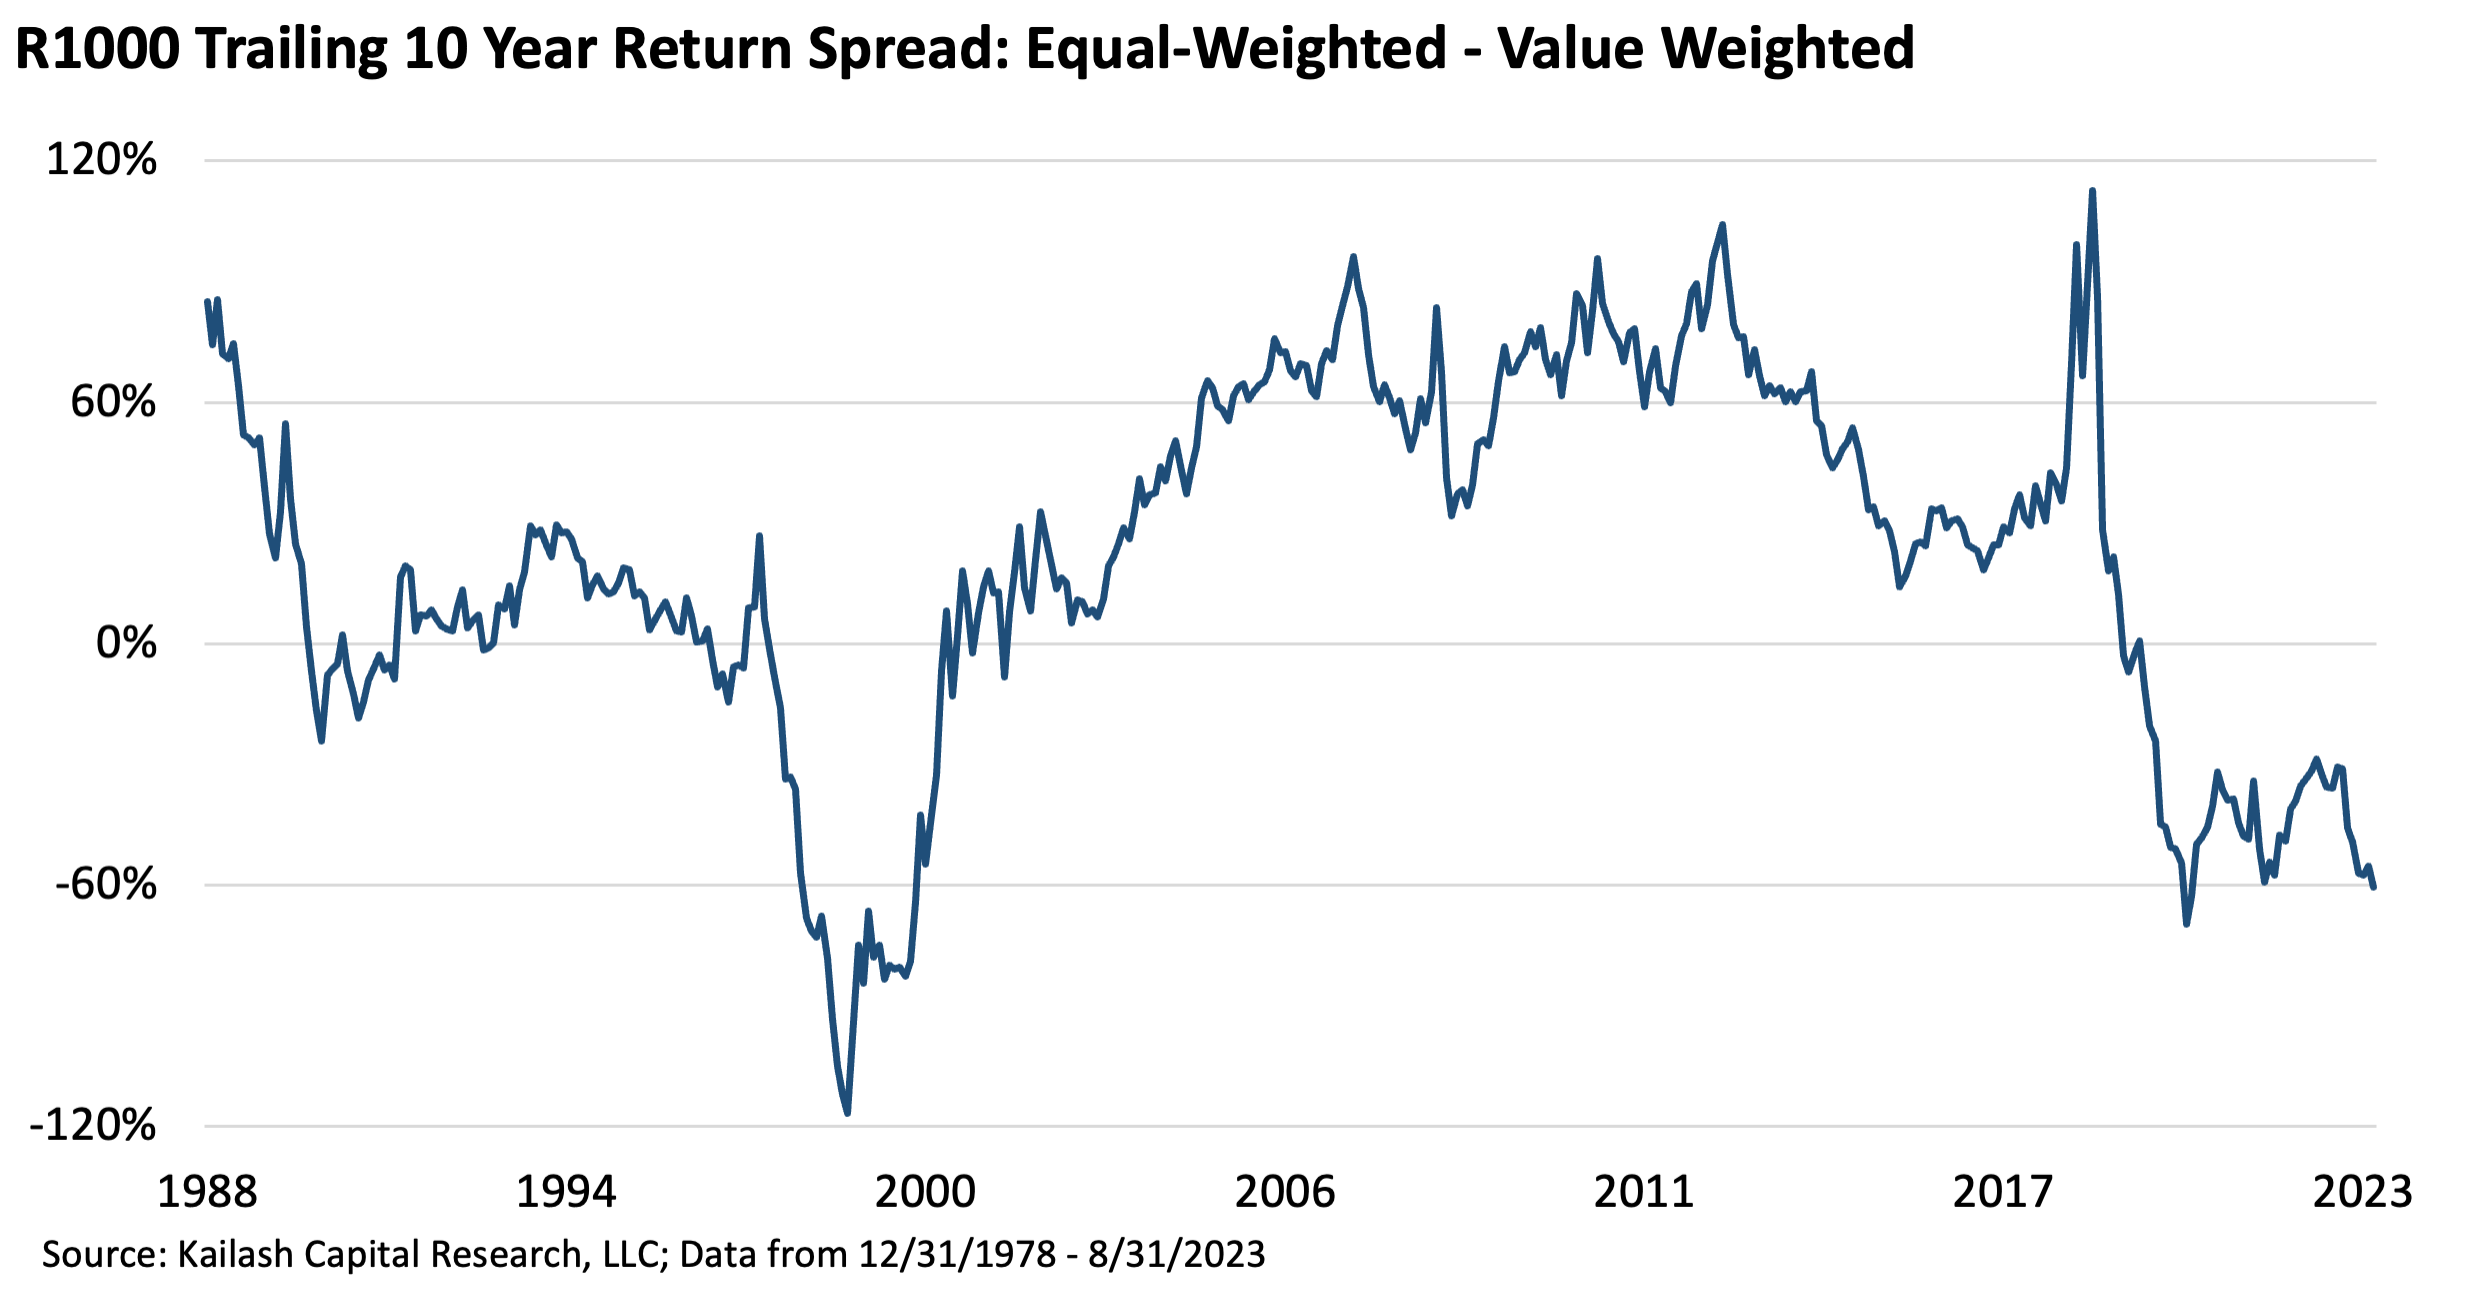 10-Year Return Spread: Russell 1000 Equal Weight vs. Russell 1000 Value Weighted